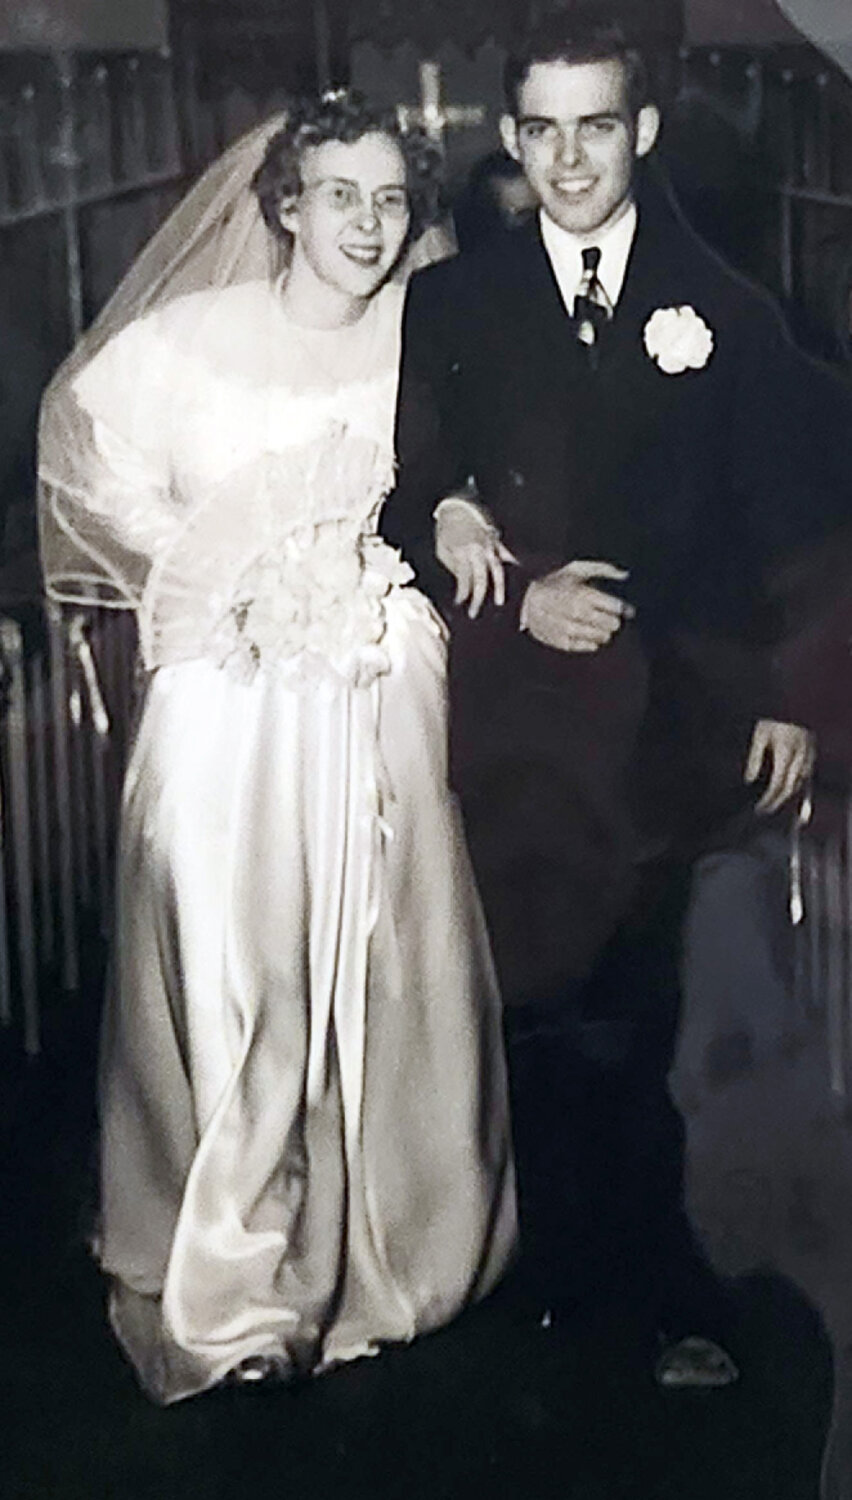 Bill Murdock and his wife Frances are pictured at their wedding.